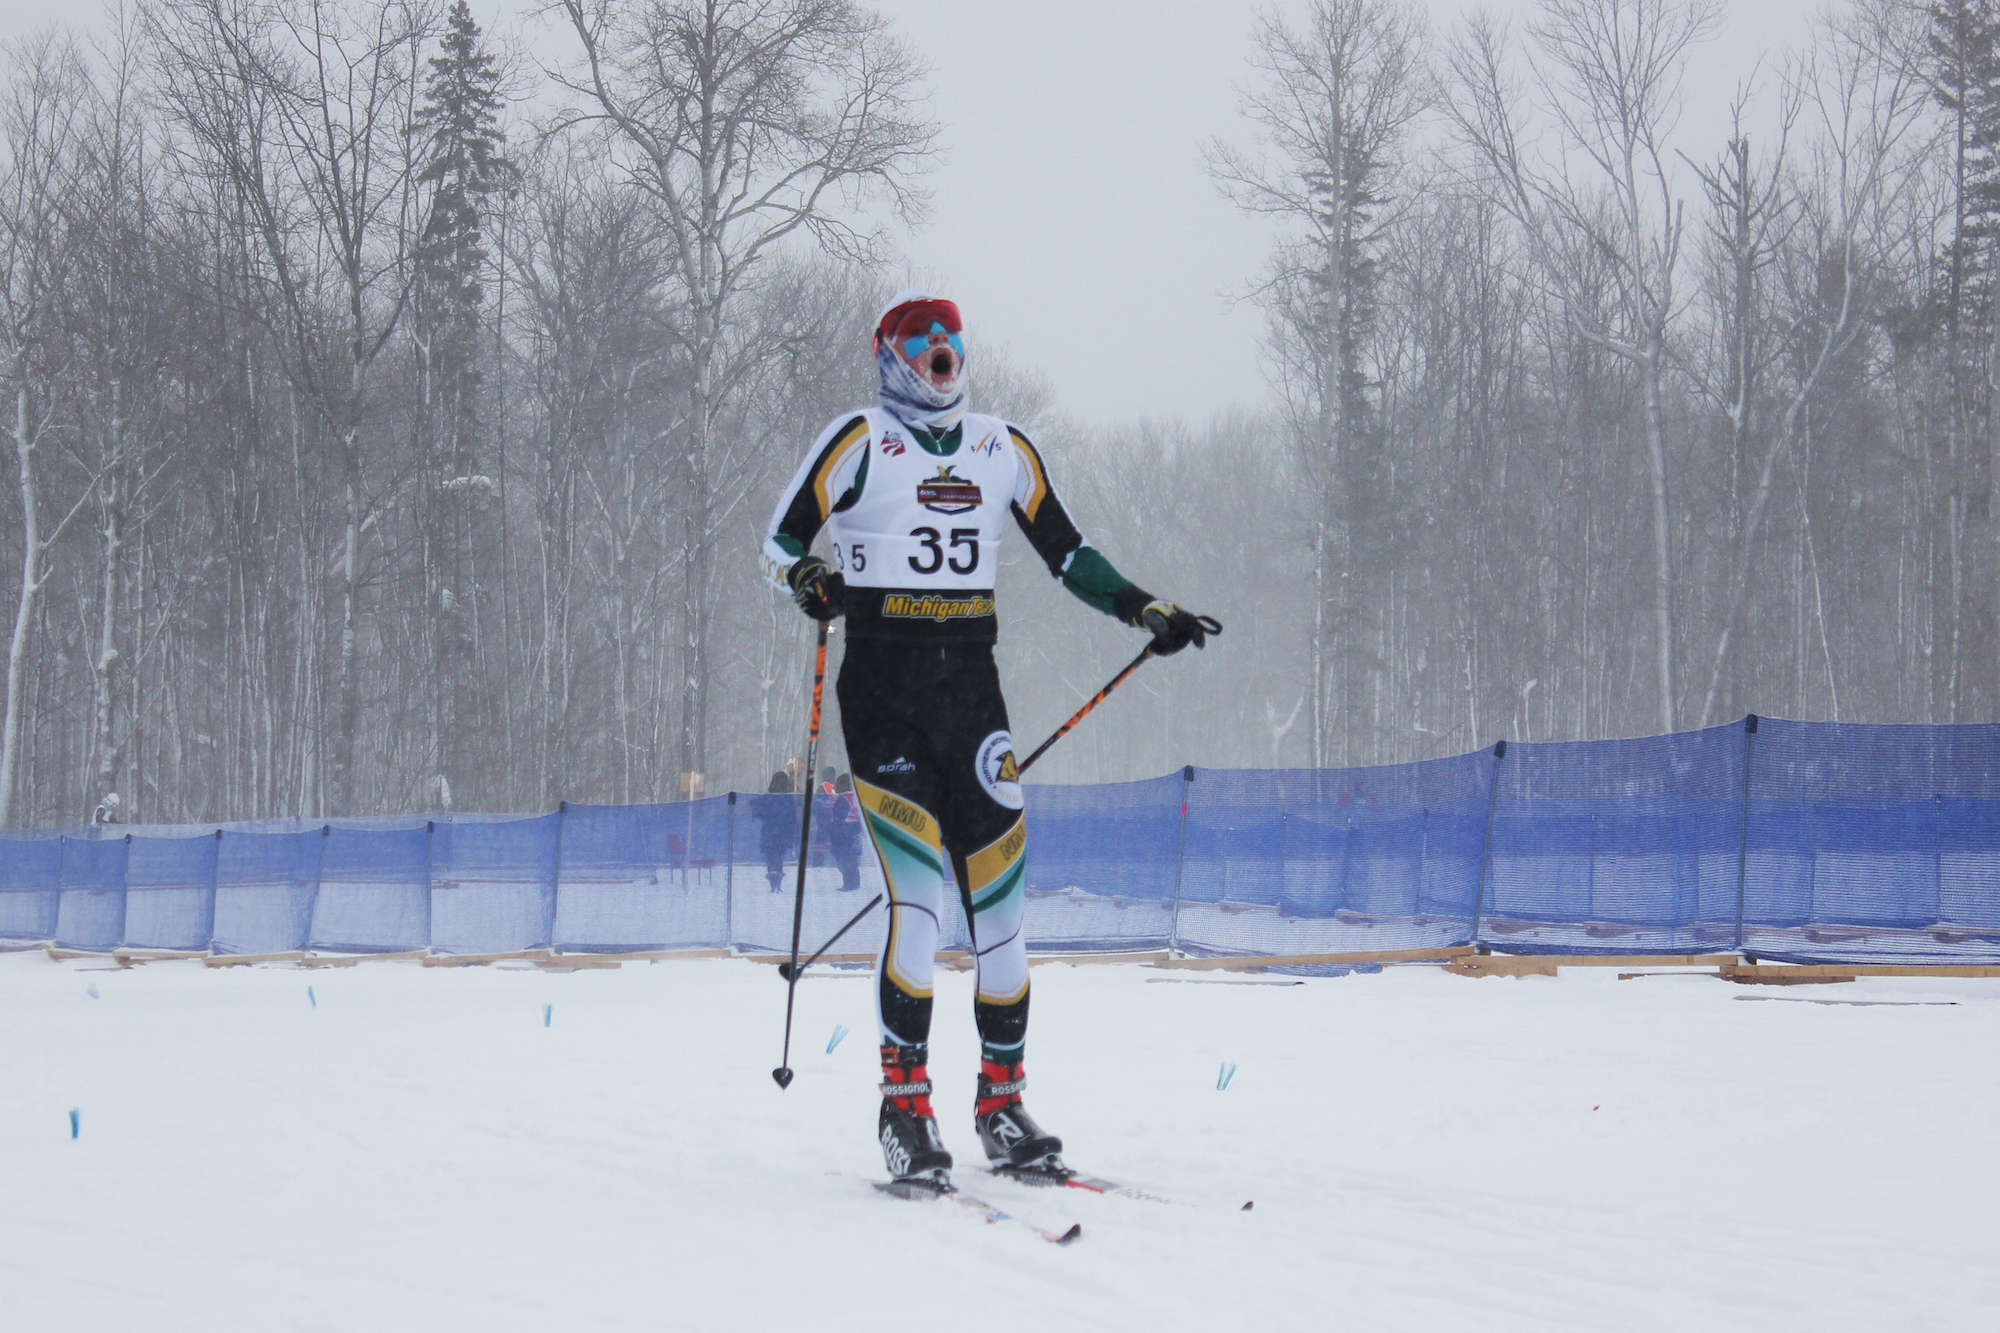 Men's 15 k freestyle, 2015 Cross Country Championships, Houghton, Michigan